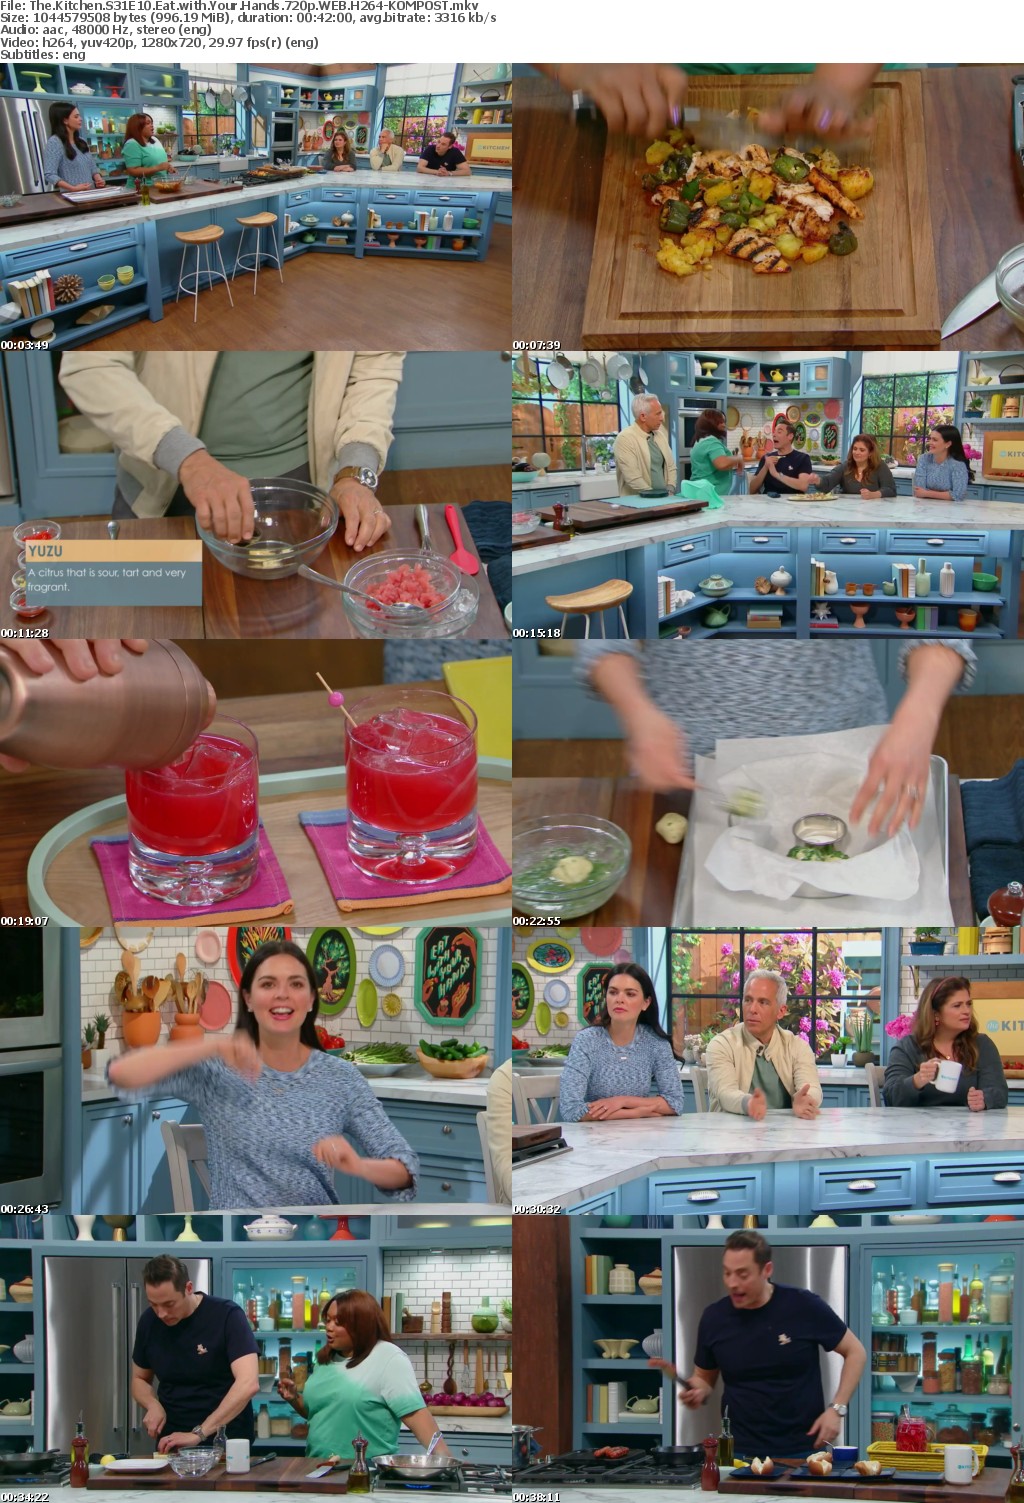 The Kitchen S31E10 Eat with Your Hands 720p WEB H264-KOMPOST